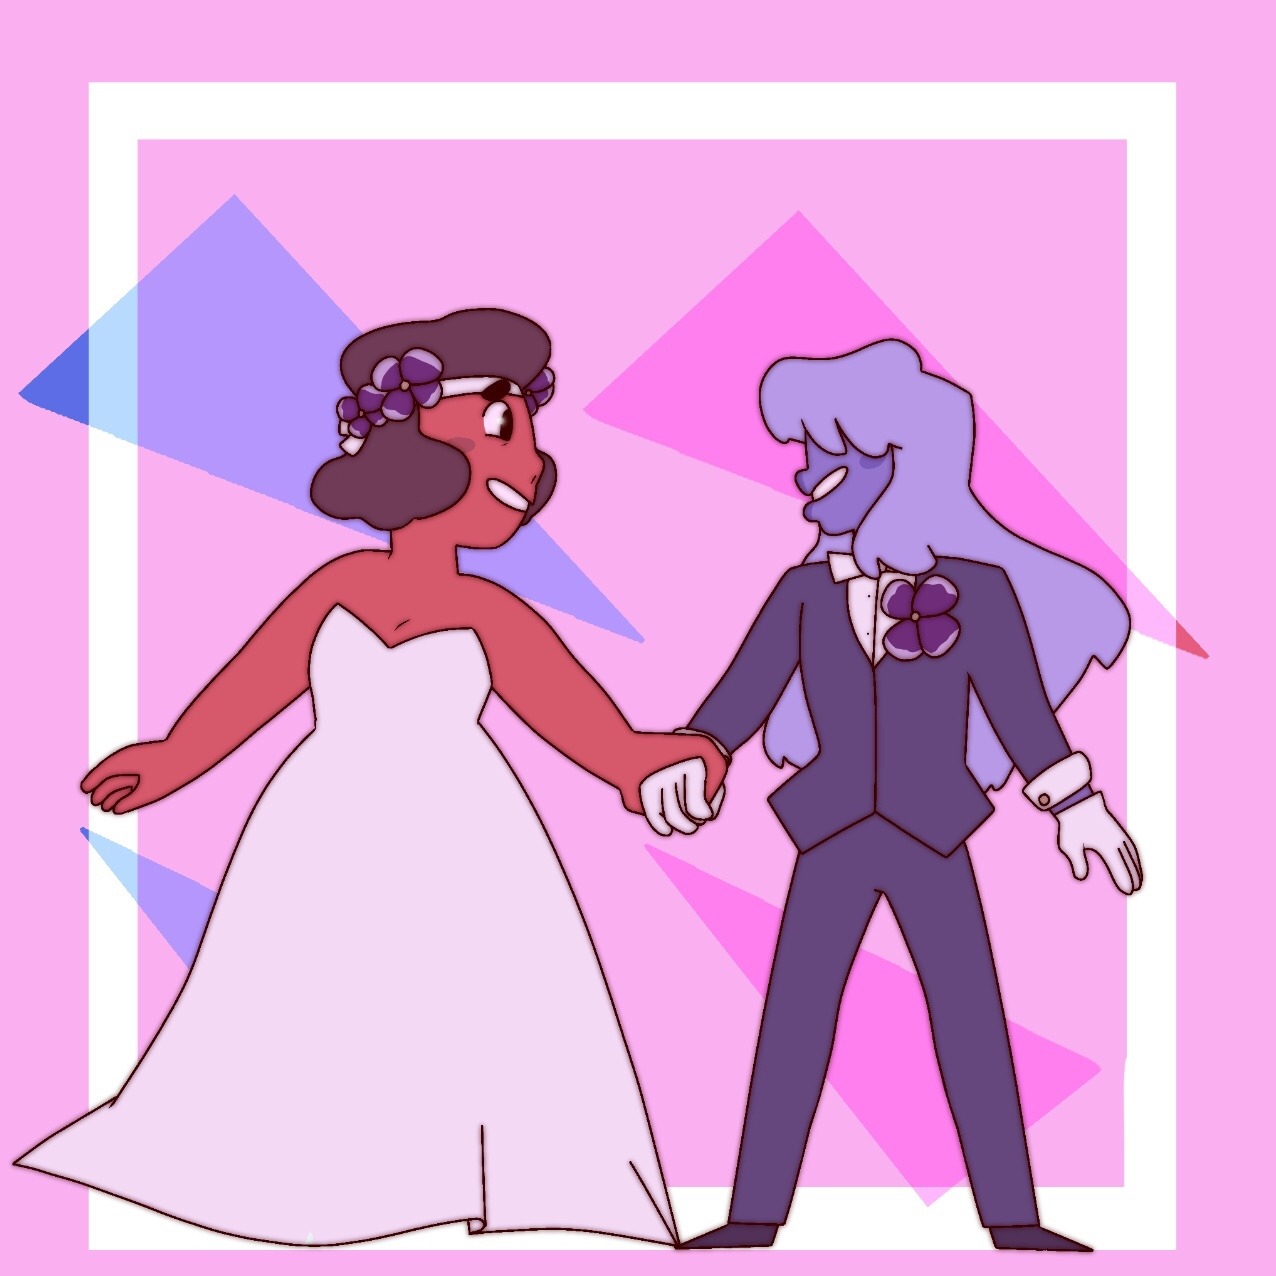 Wives, married!